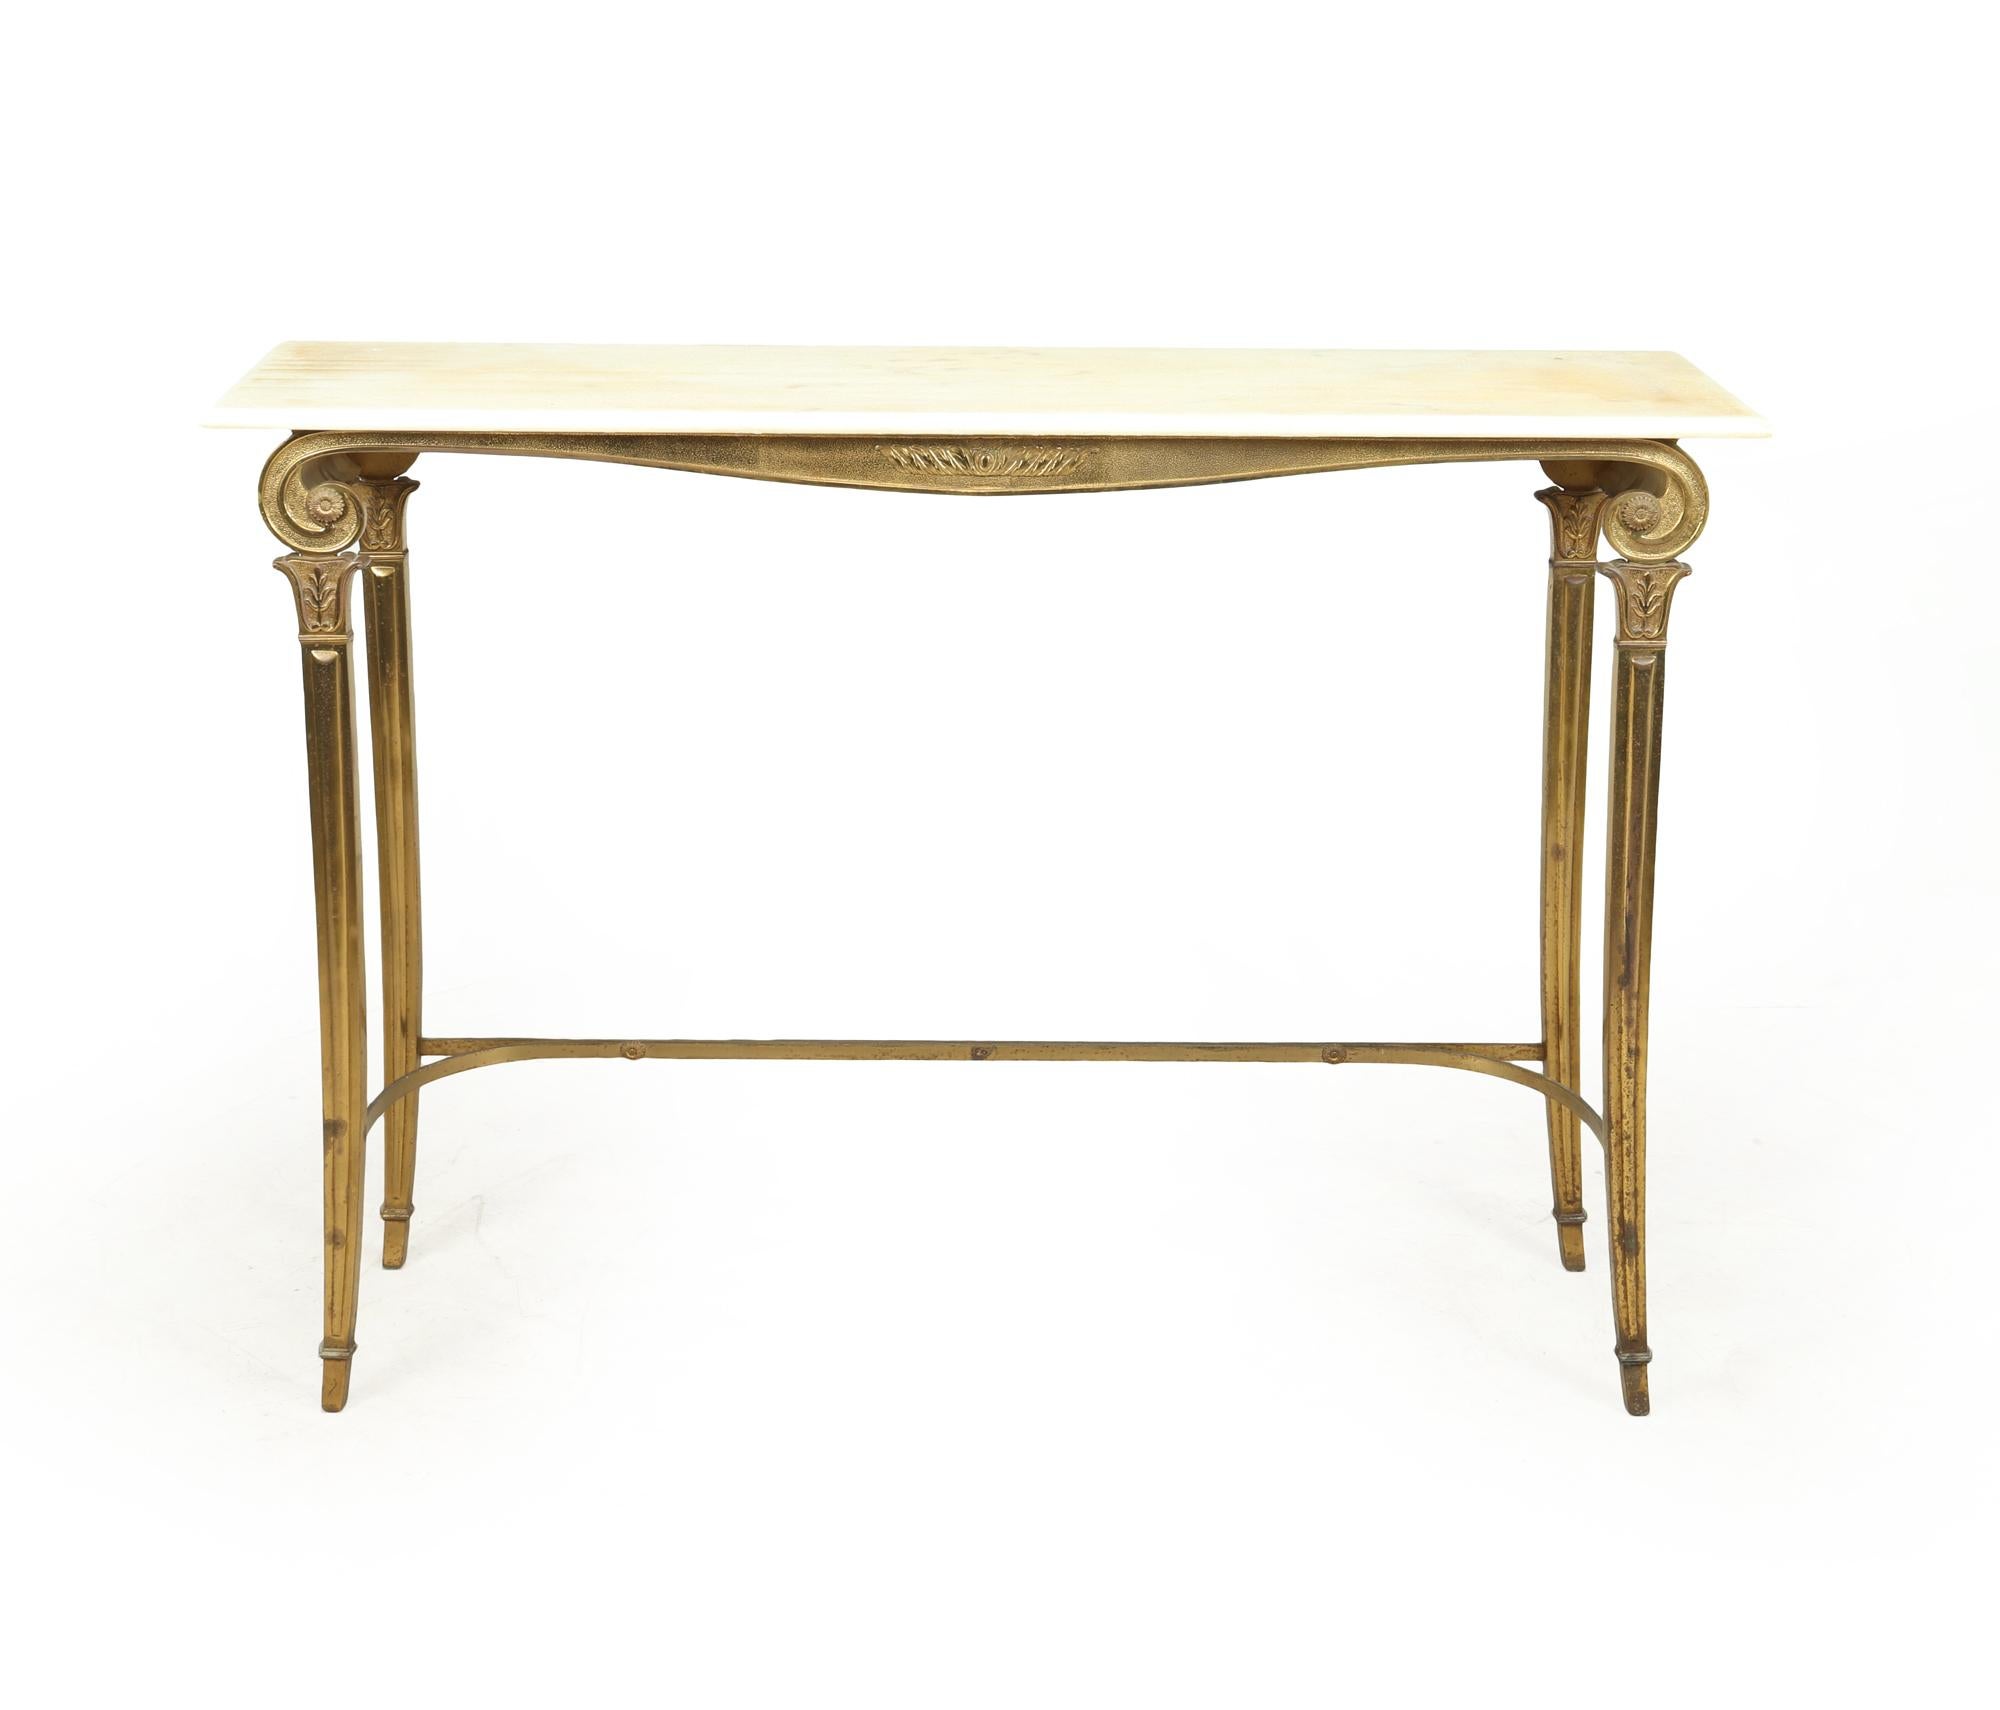 French Provincial Gilt Metal and White Marble Console Table